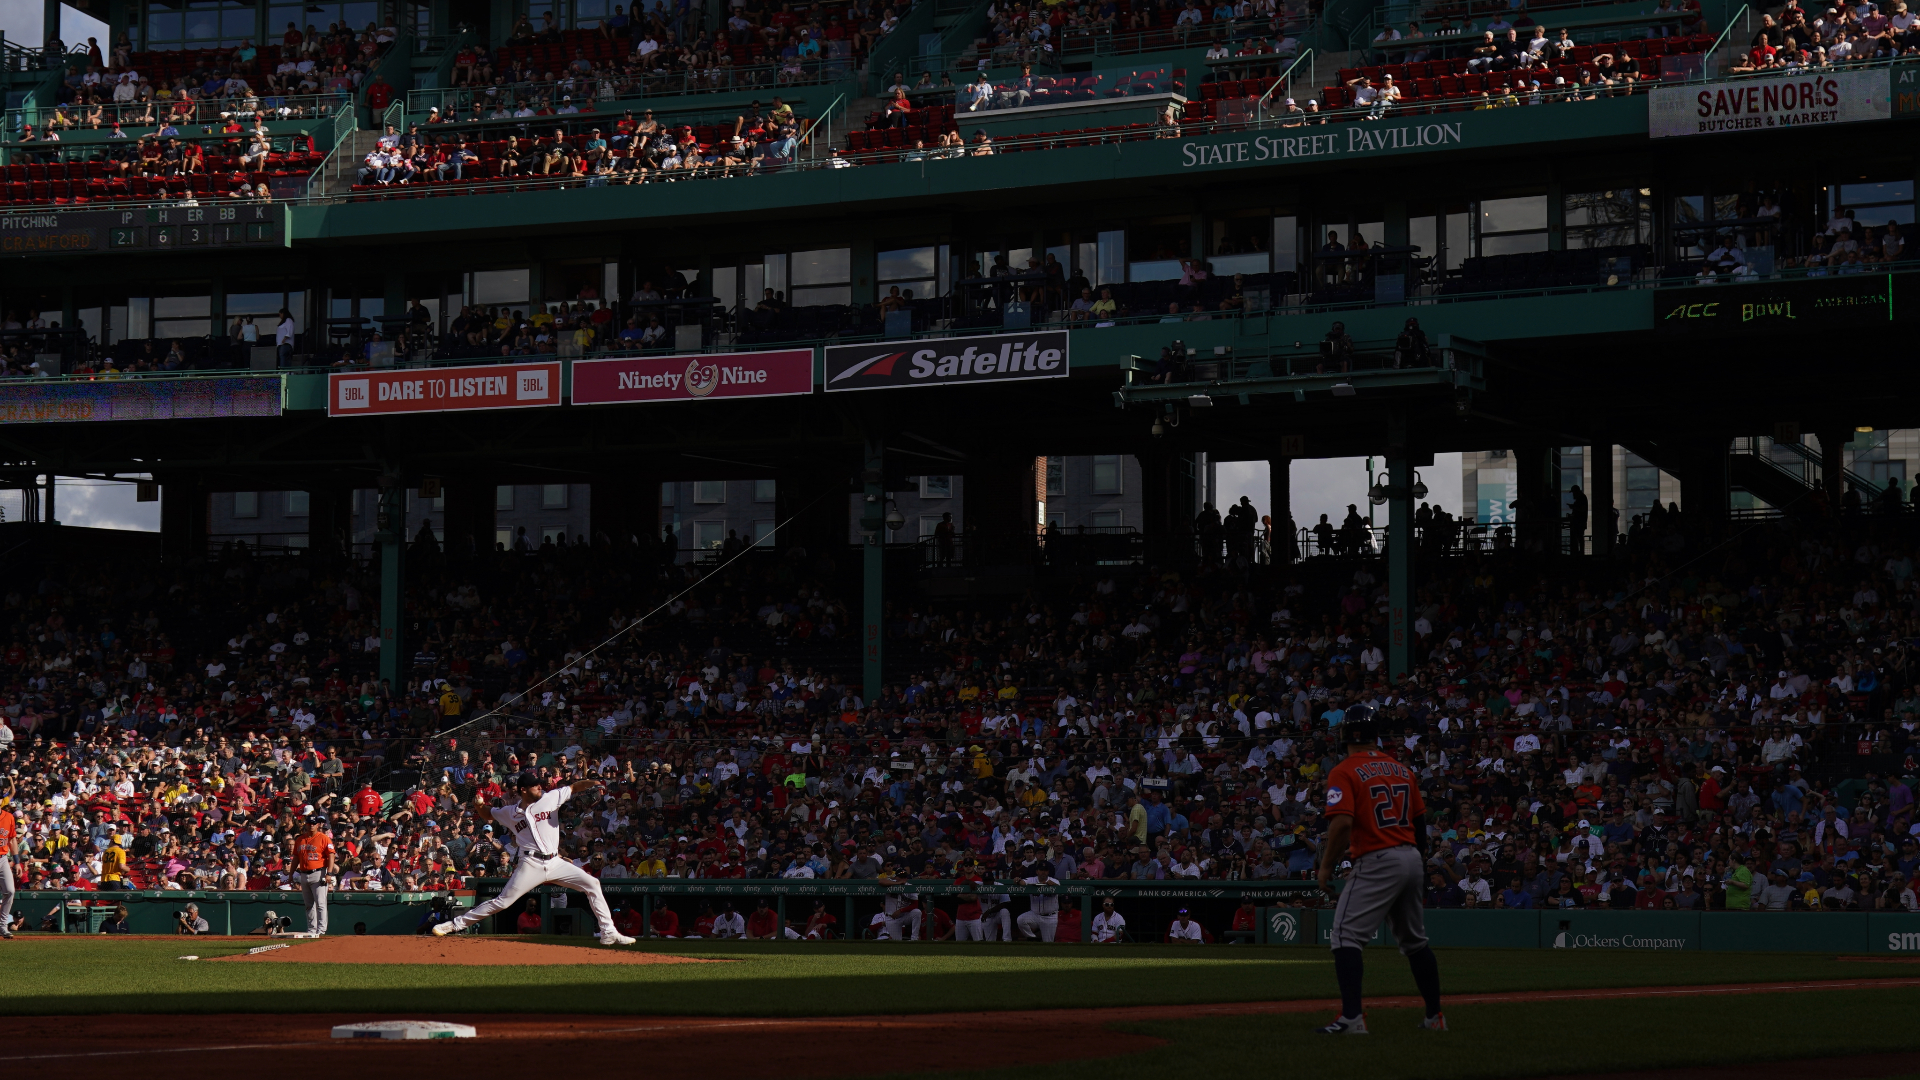 At 106 years old, Fenway Park leads MLB sustainability efforts